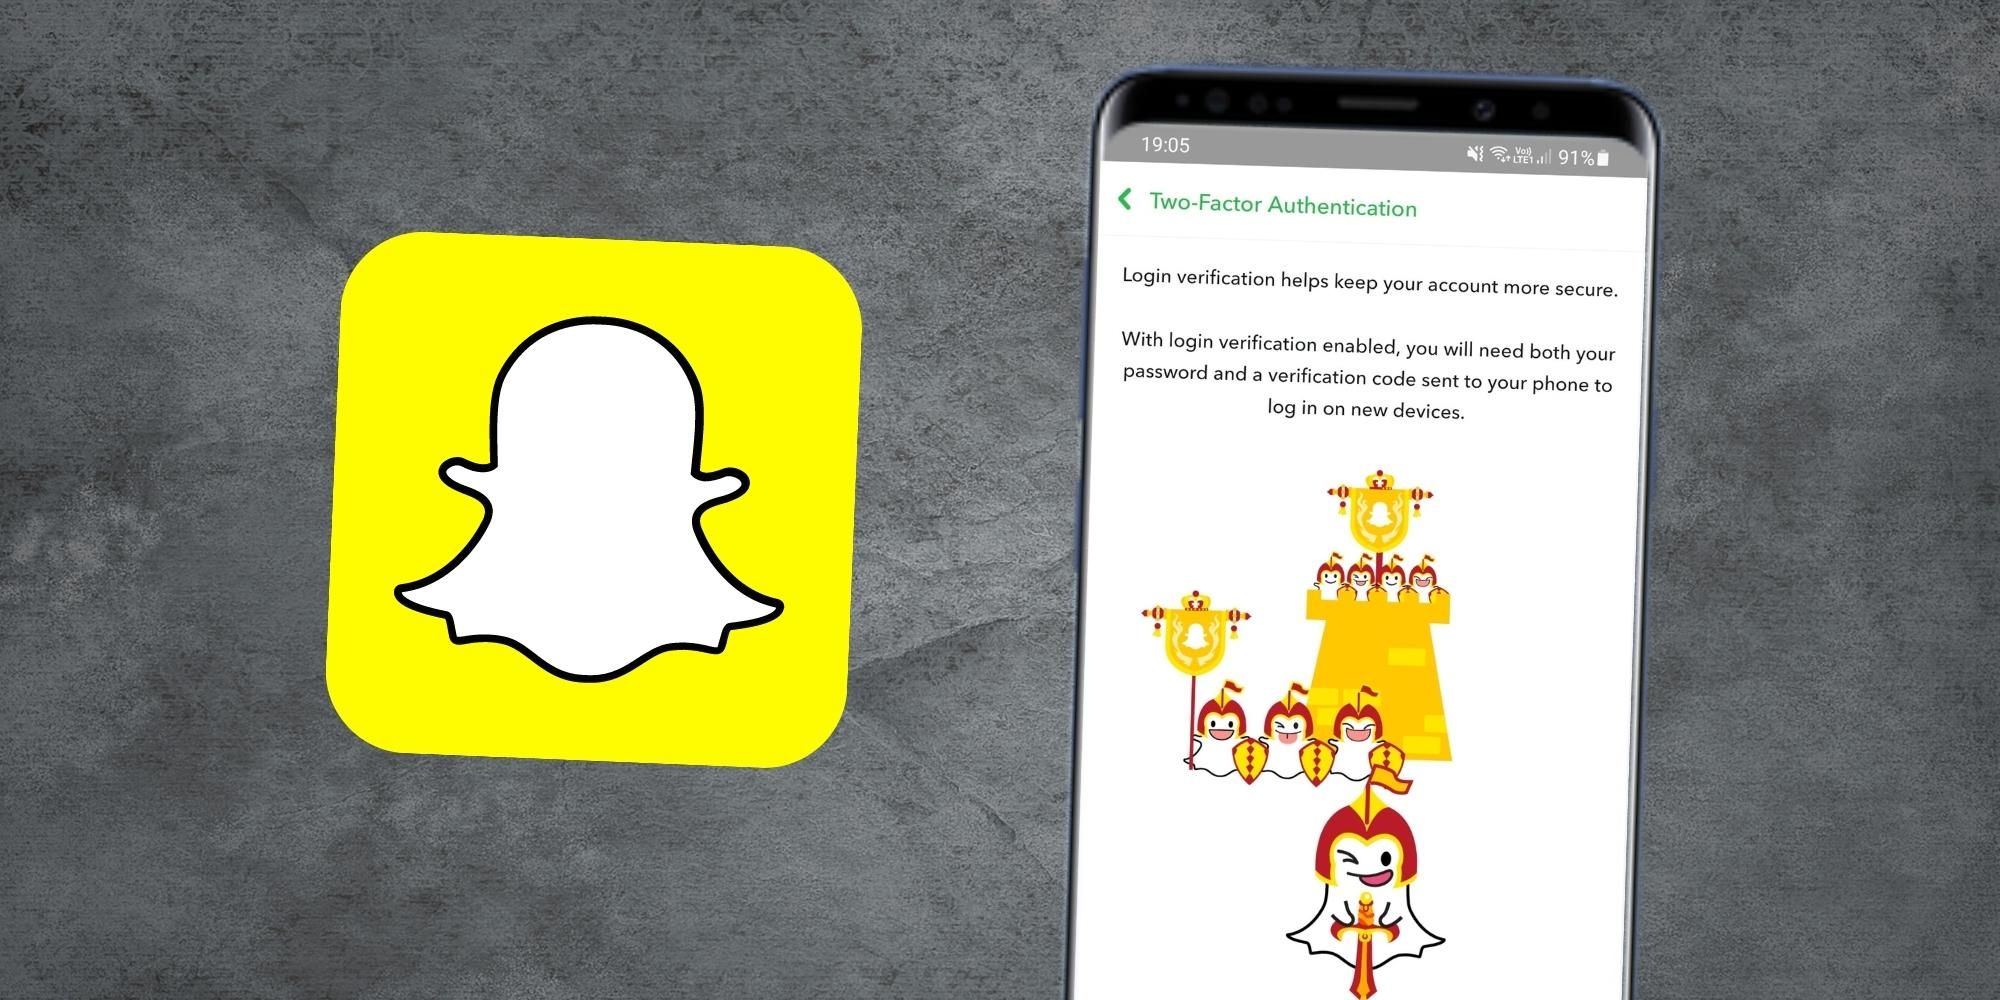 how to enable two-factor authentication on Snapchat